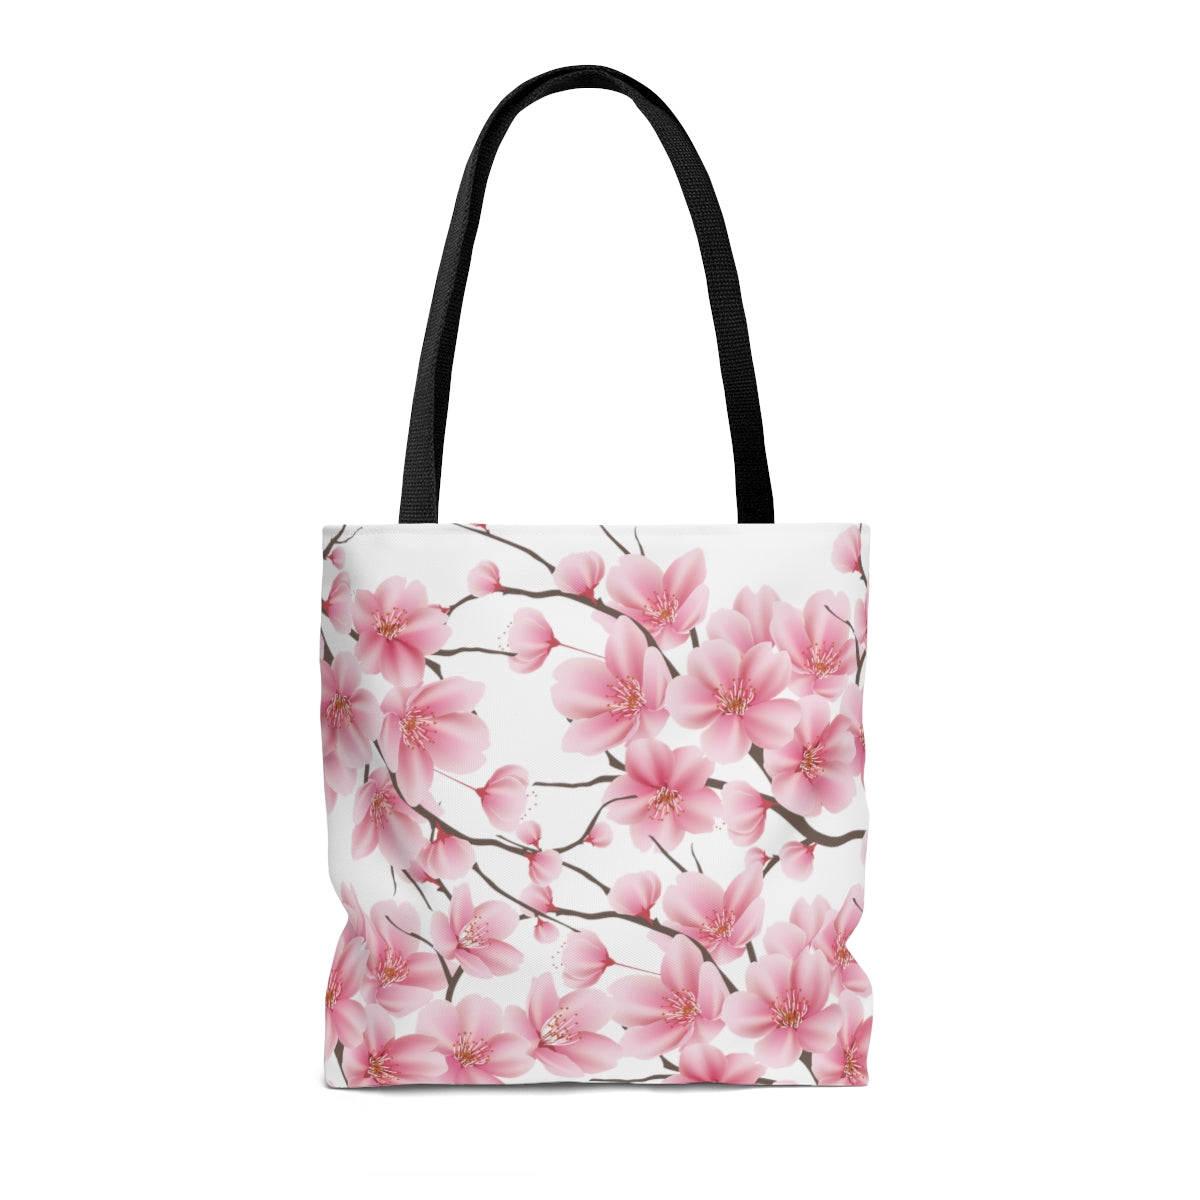 Cherry Blossom Tote Bag / Pink Floral Tote Bag